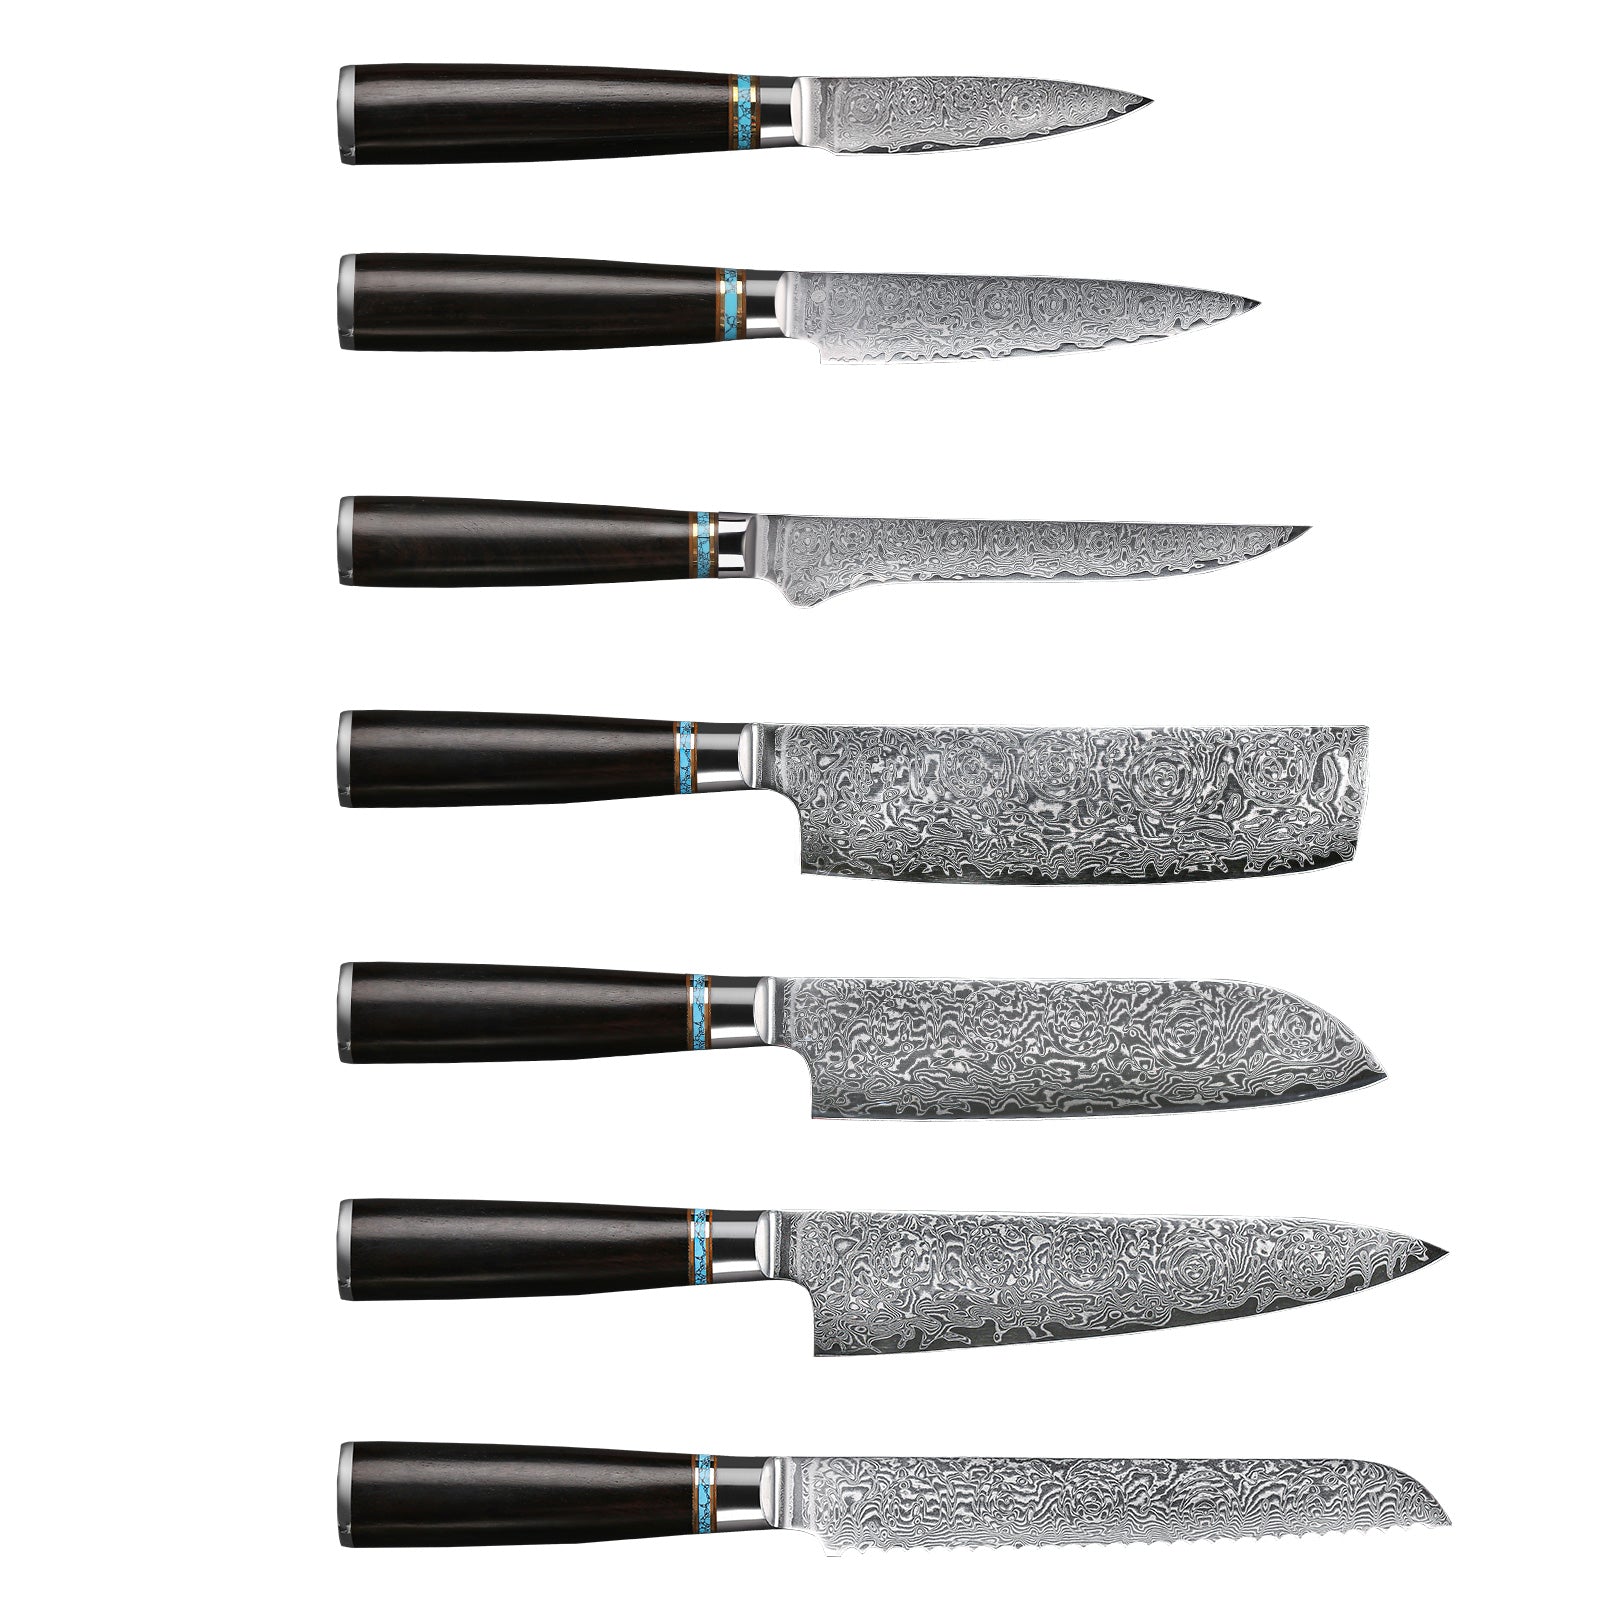 Chef Knife Sets are a great way to get started in the kitchen. Not only do they include a chef's knife, but also a paring knife and a serrated knife. Most chef knife sets are made in Japan, and are of the highest quality. A good set will last for many years if cared for properly.